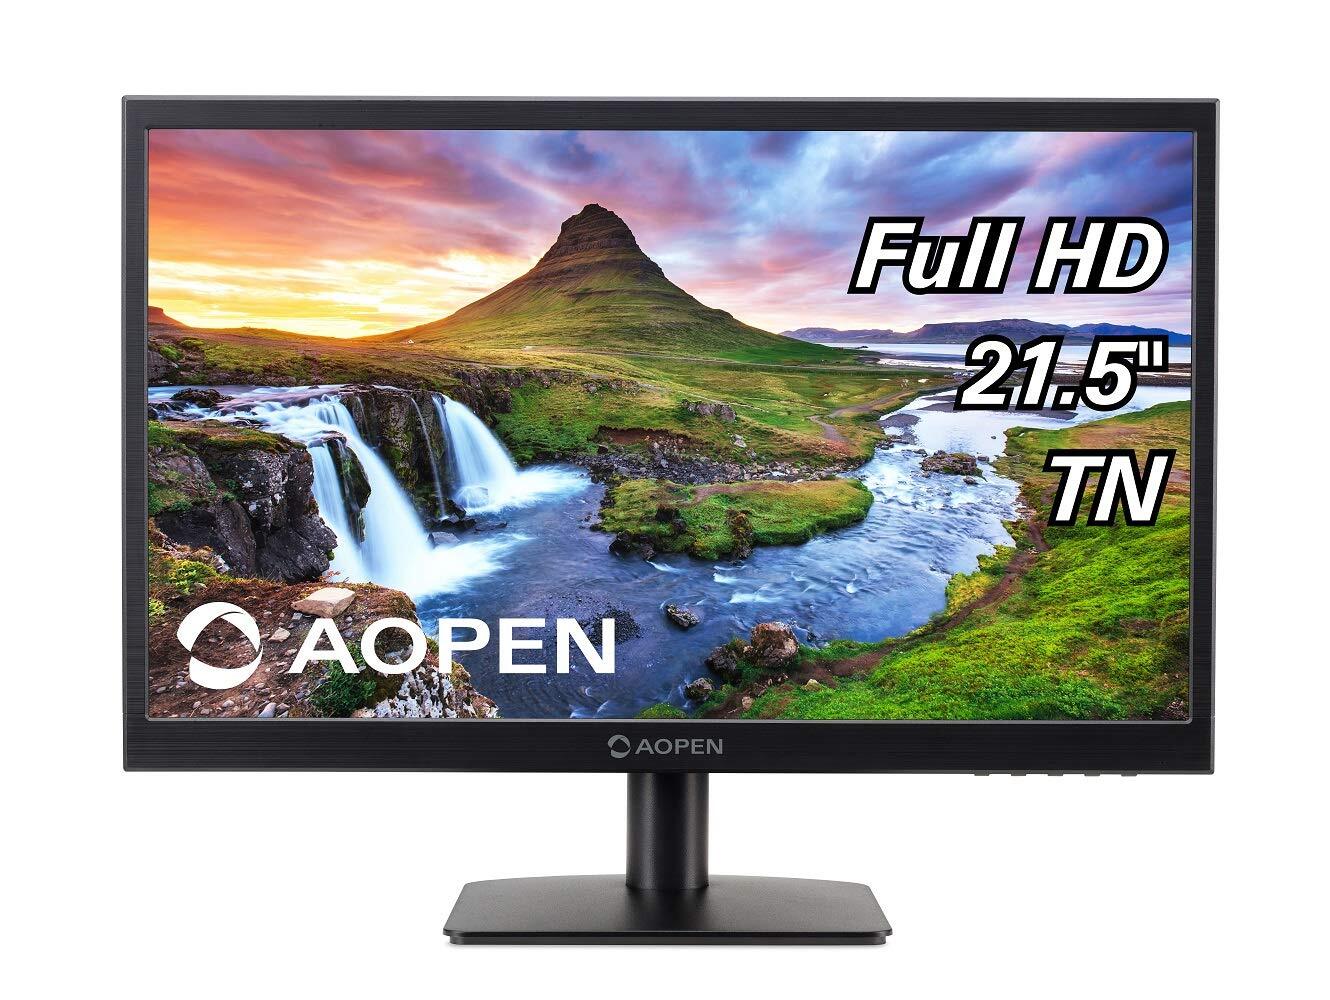 Aopen by Acer 18.5-inch LED Monitor with VGA Port - 19CX1Q (Black)